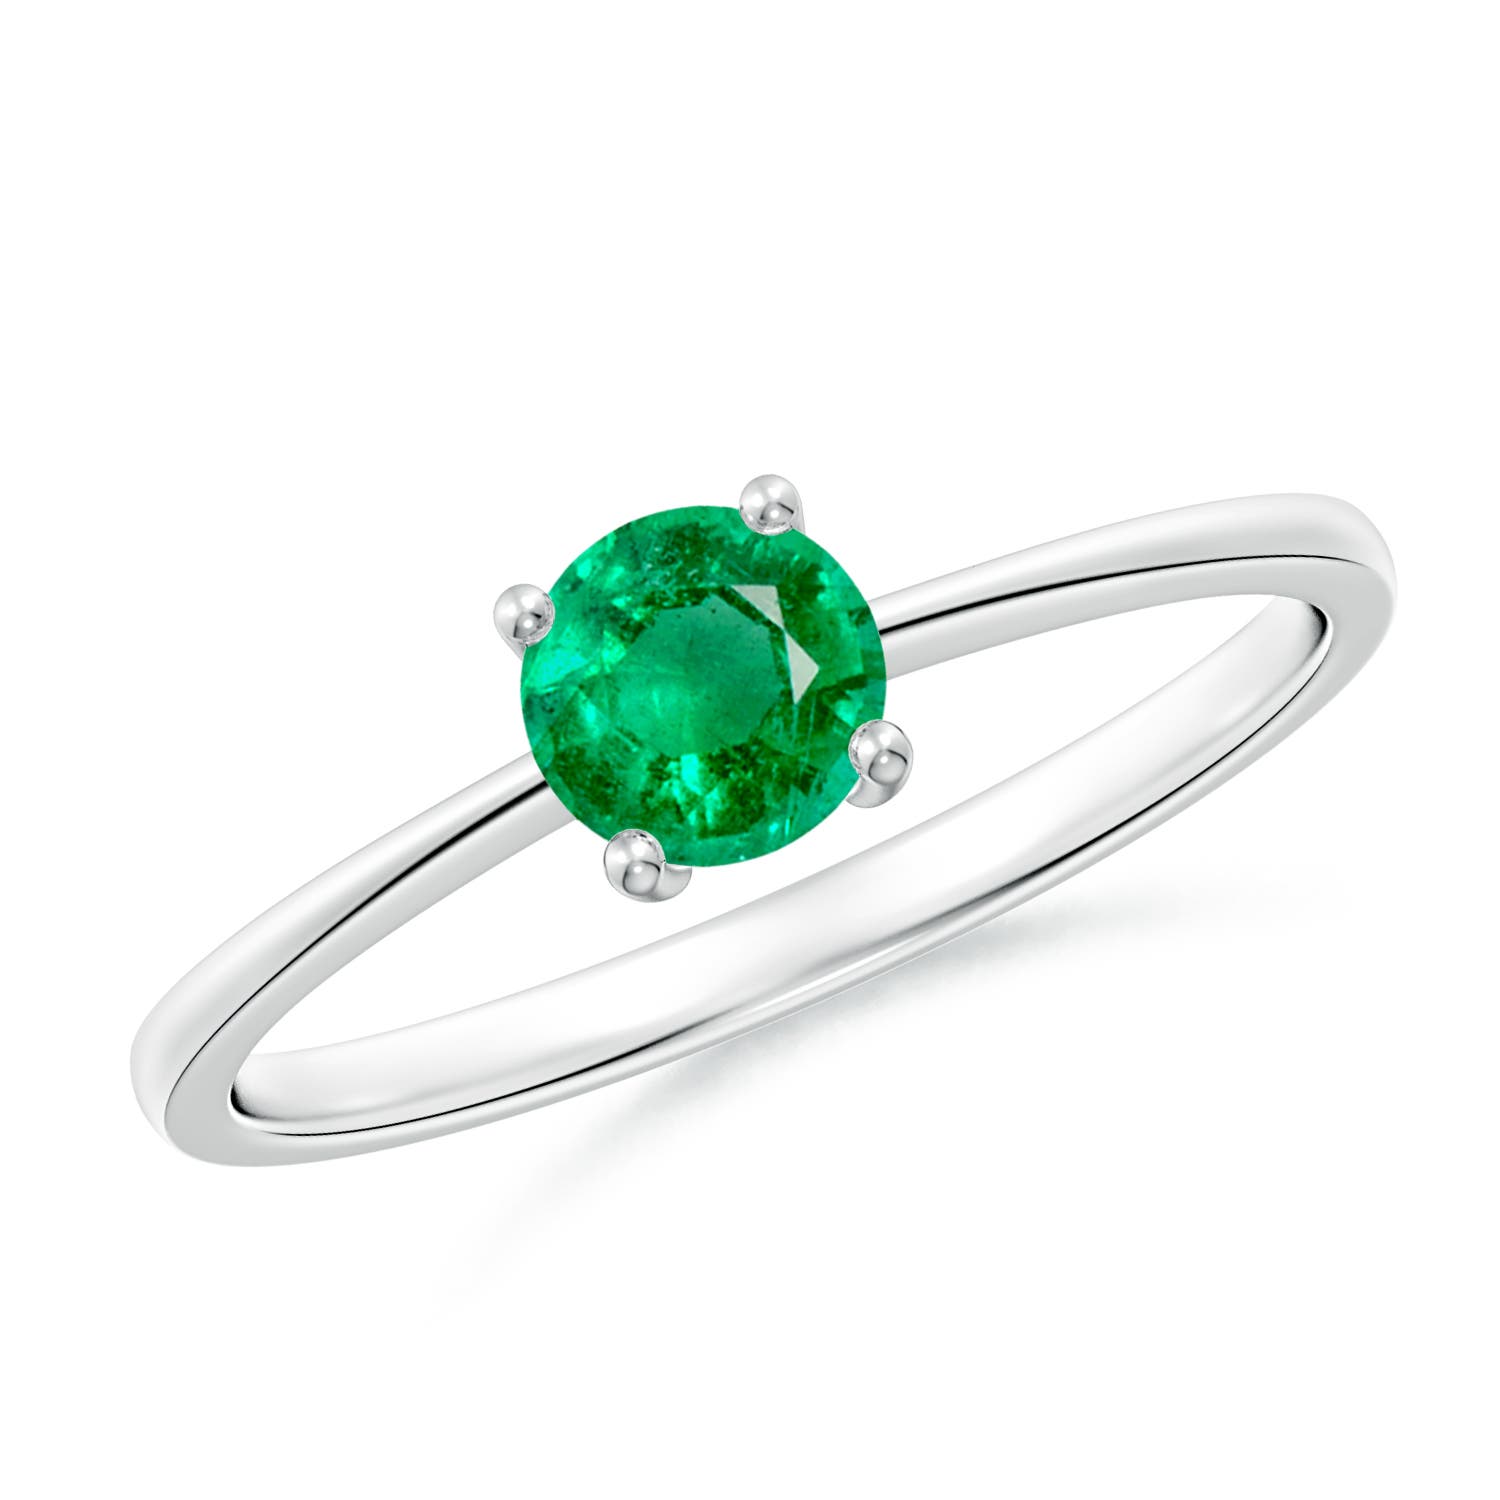 AAA - Emerald / 0.45 CT / 14 KT White Gold